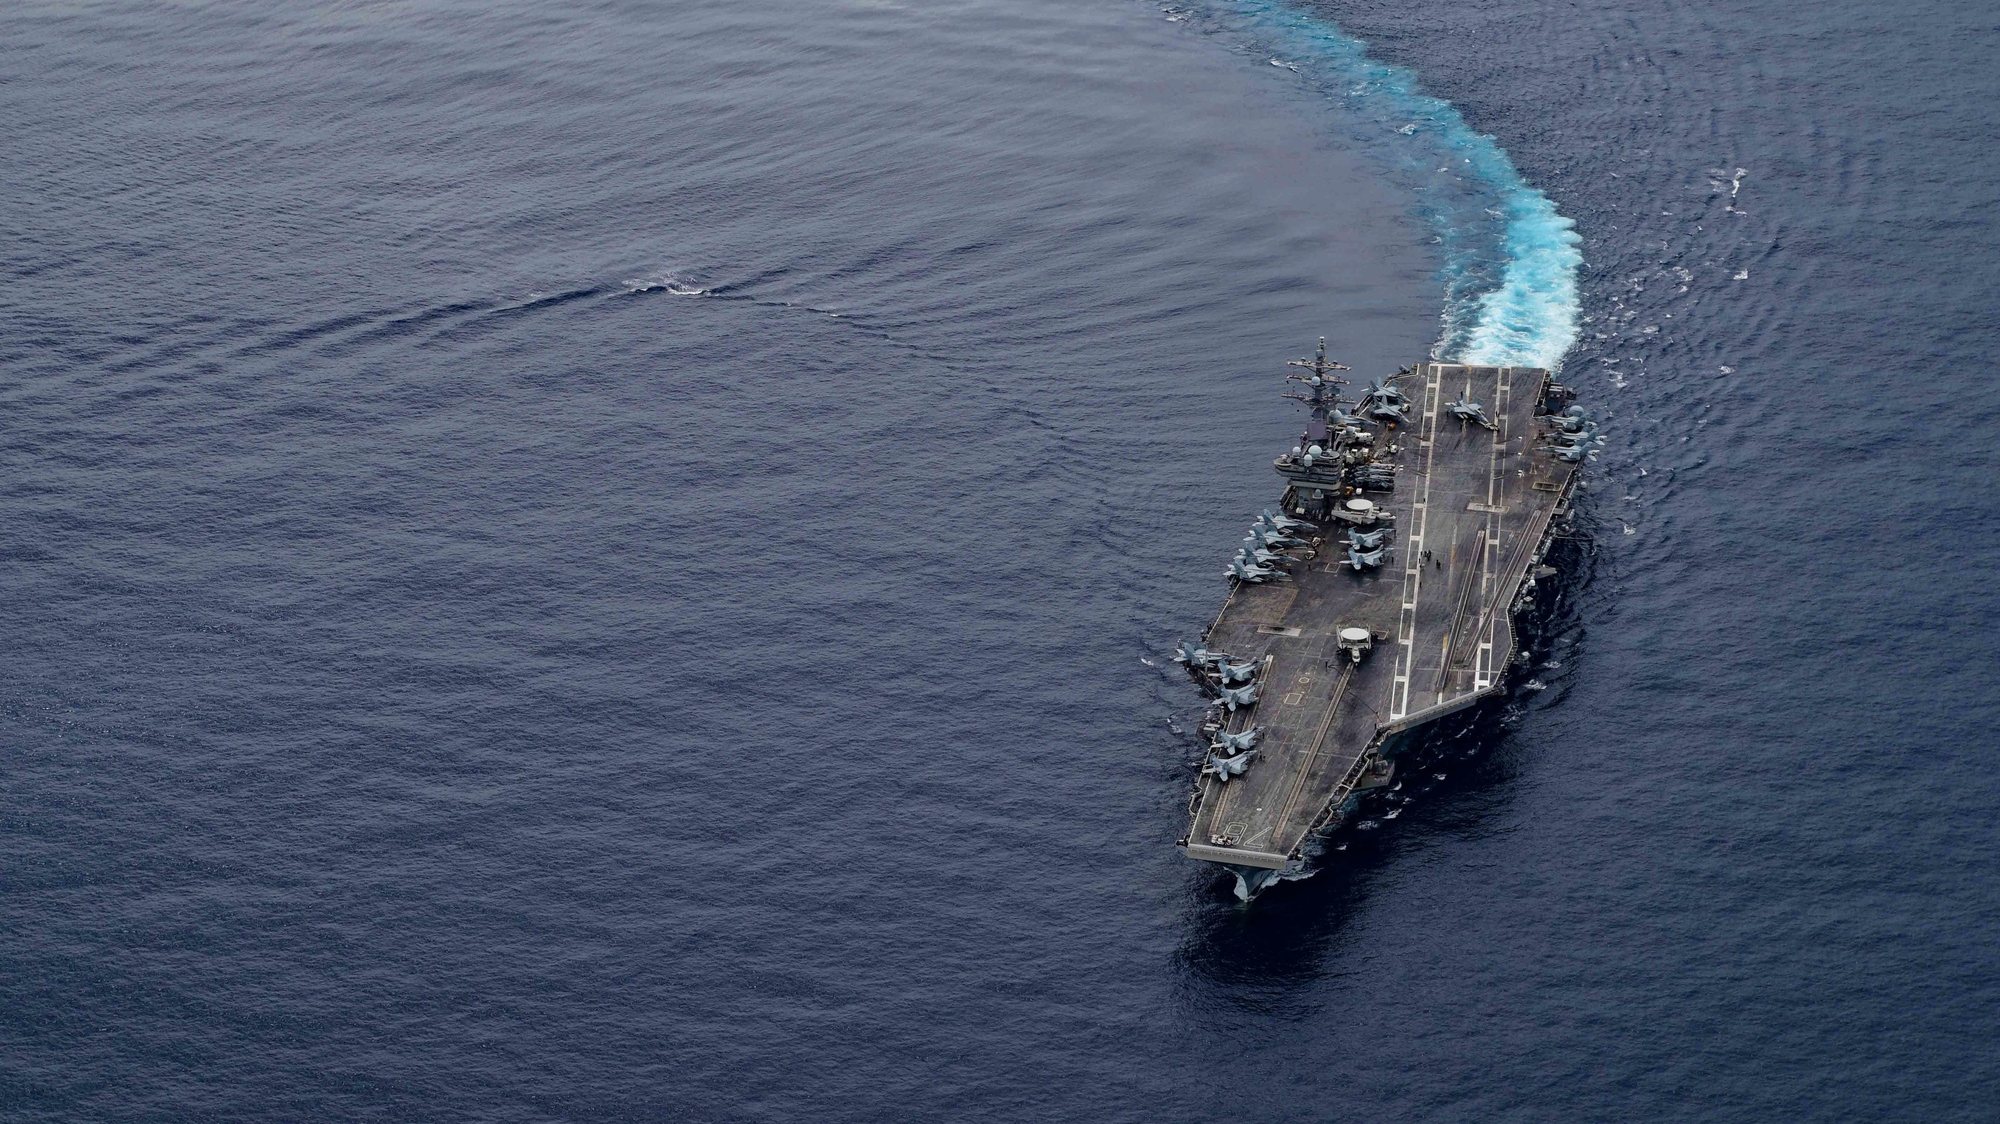 epa08531571 A handout photo made available by the US Navy shows the US Navy’s only forward-deployed aircraft carrier USS Ronald Reagan (CVN 76) steams through international waters while conducting routine flight operations, ensuring Ronald Reagan’s combat proficiency and readiness, in the South China Sea, 04 July 2020 (issued 07 July 2020). The USS Ronald Reagan is the flagship of Carrier Strike Group (CSG) 5. The Nimitz and Ronald Reagan carrier strike groups are conducting dual-carrier operations in the Philippine Sea as the Nimitz Carrier Strike Force.  EPA/Petty Officer 3rd Class Jason Tarleton / HANDOUT  HANDOUT EDITORIAL USE ONLY/NO SALES